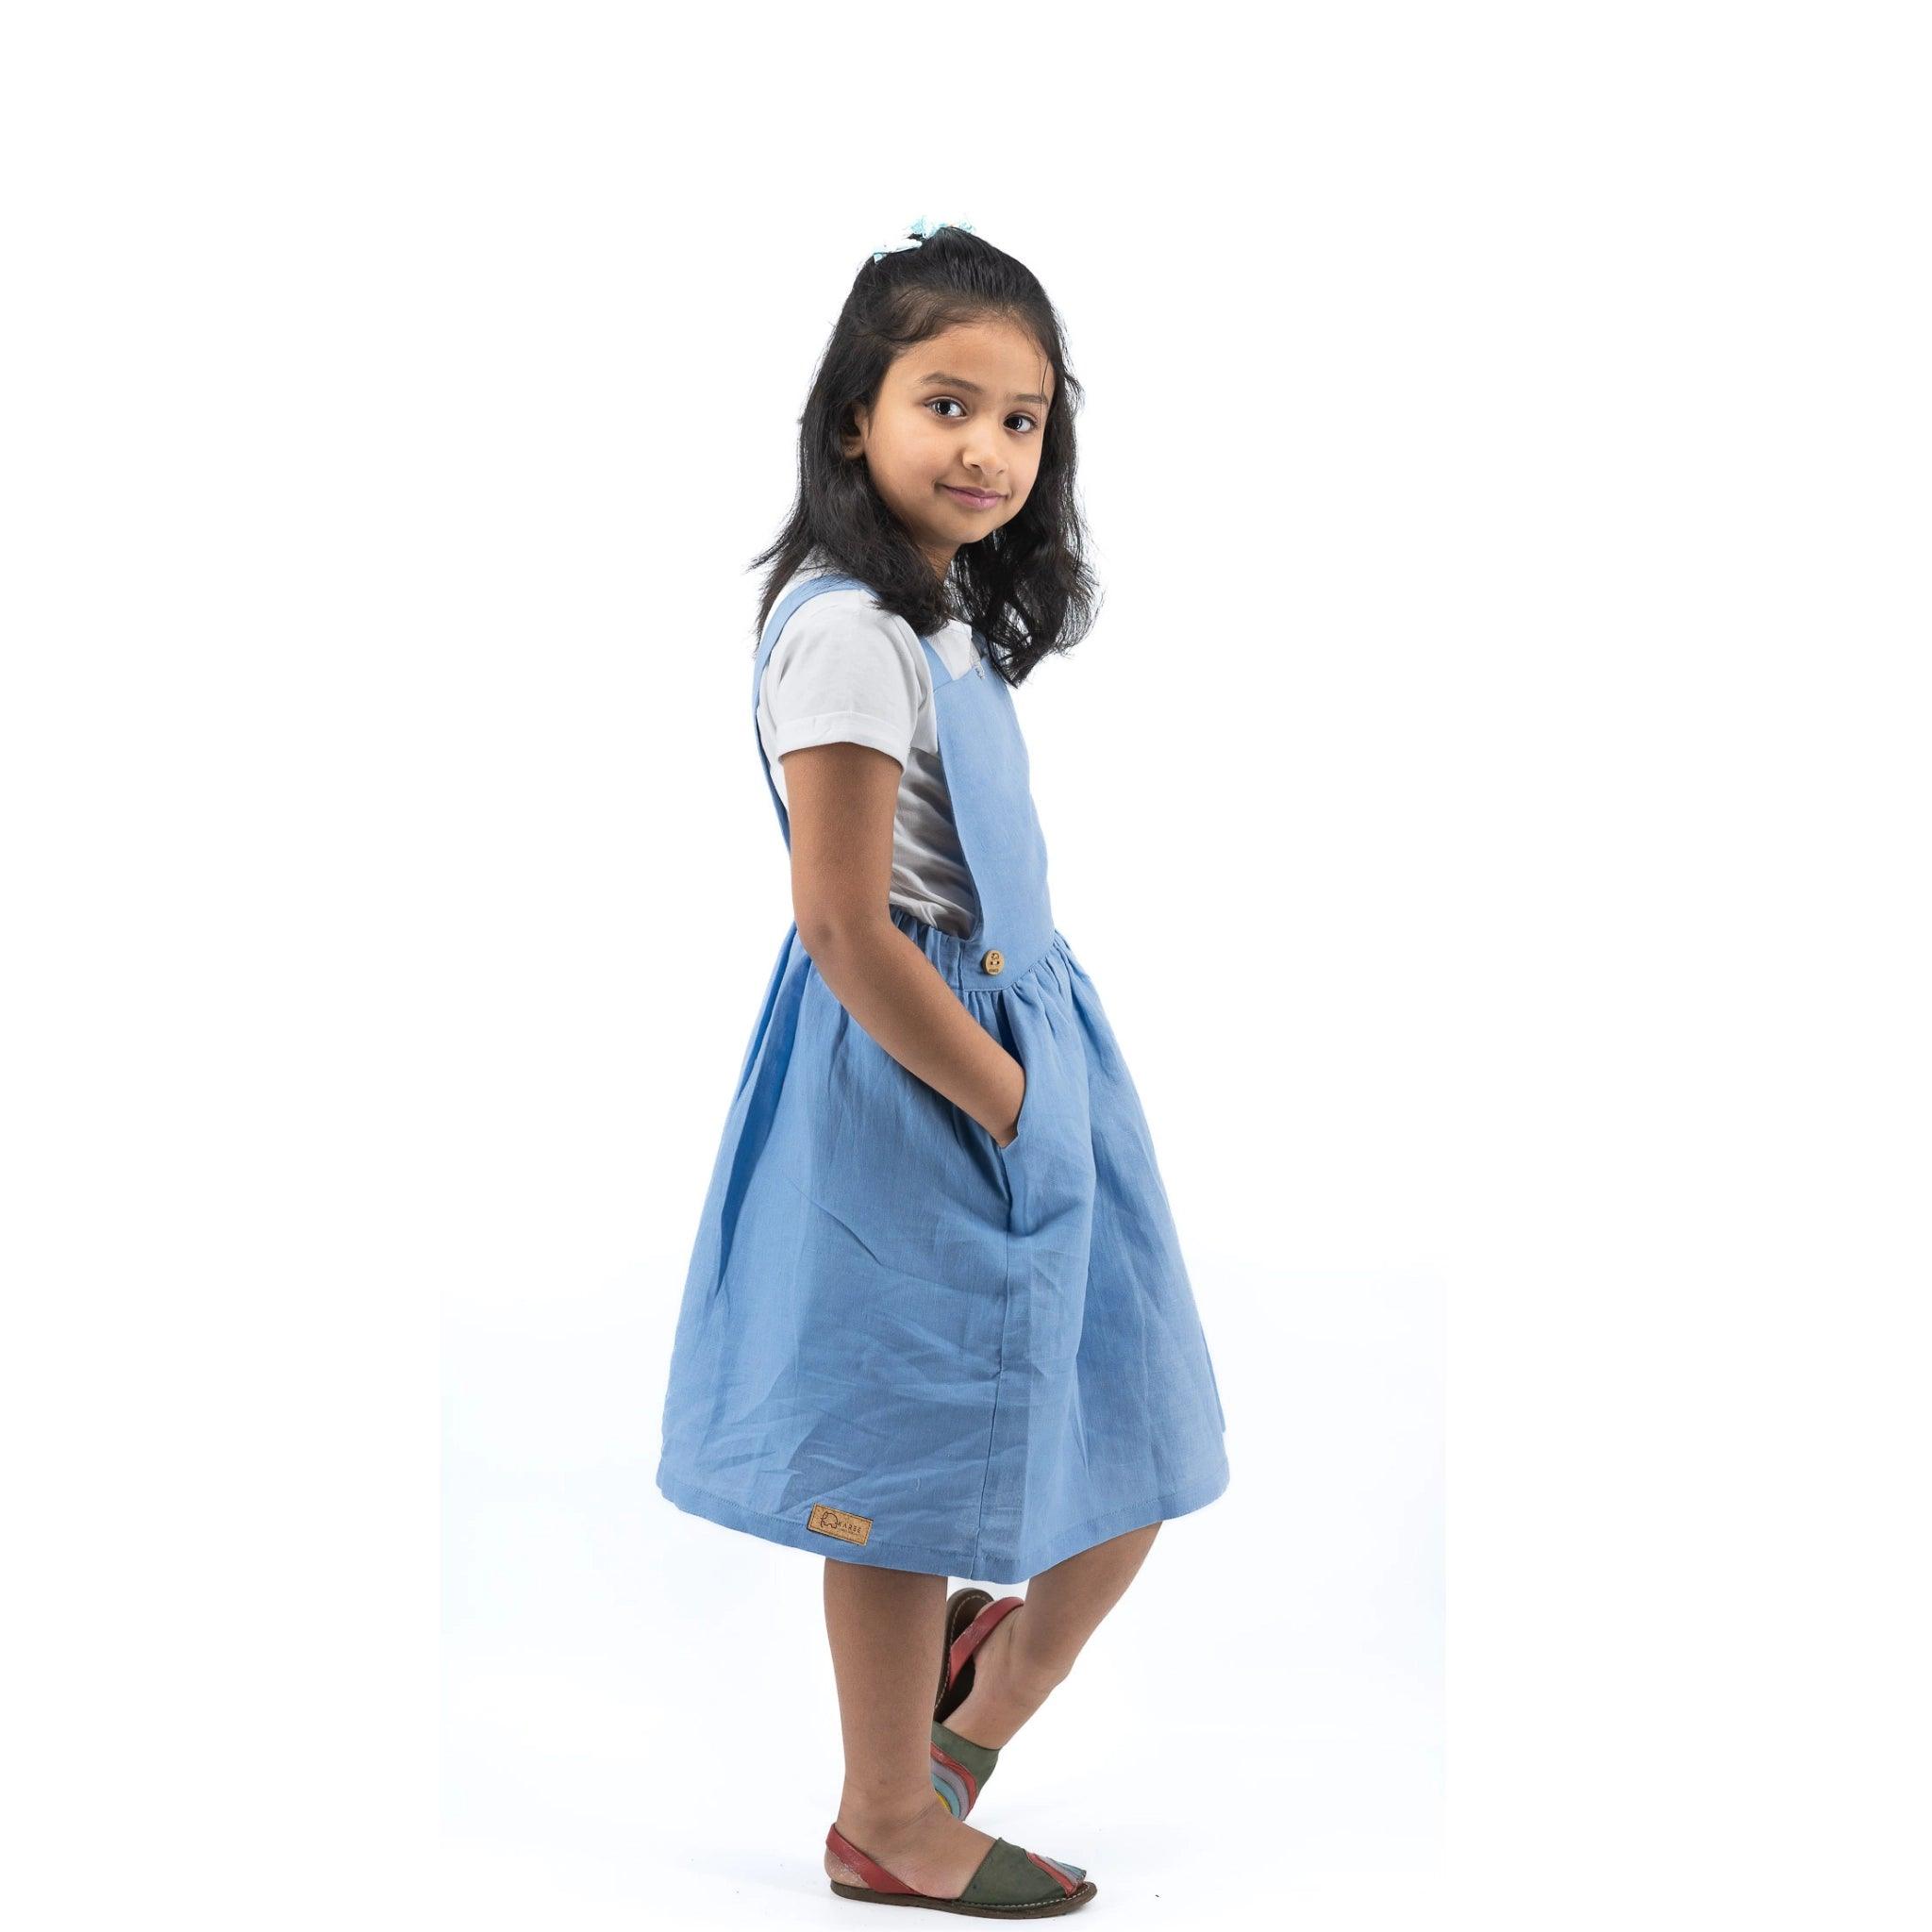 A young girl in a Karee cerulean blue linen pinafore and white shirt posing with her hand on her hip, looking over her shoulder on a white background.